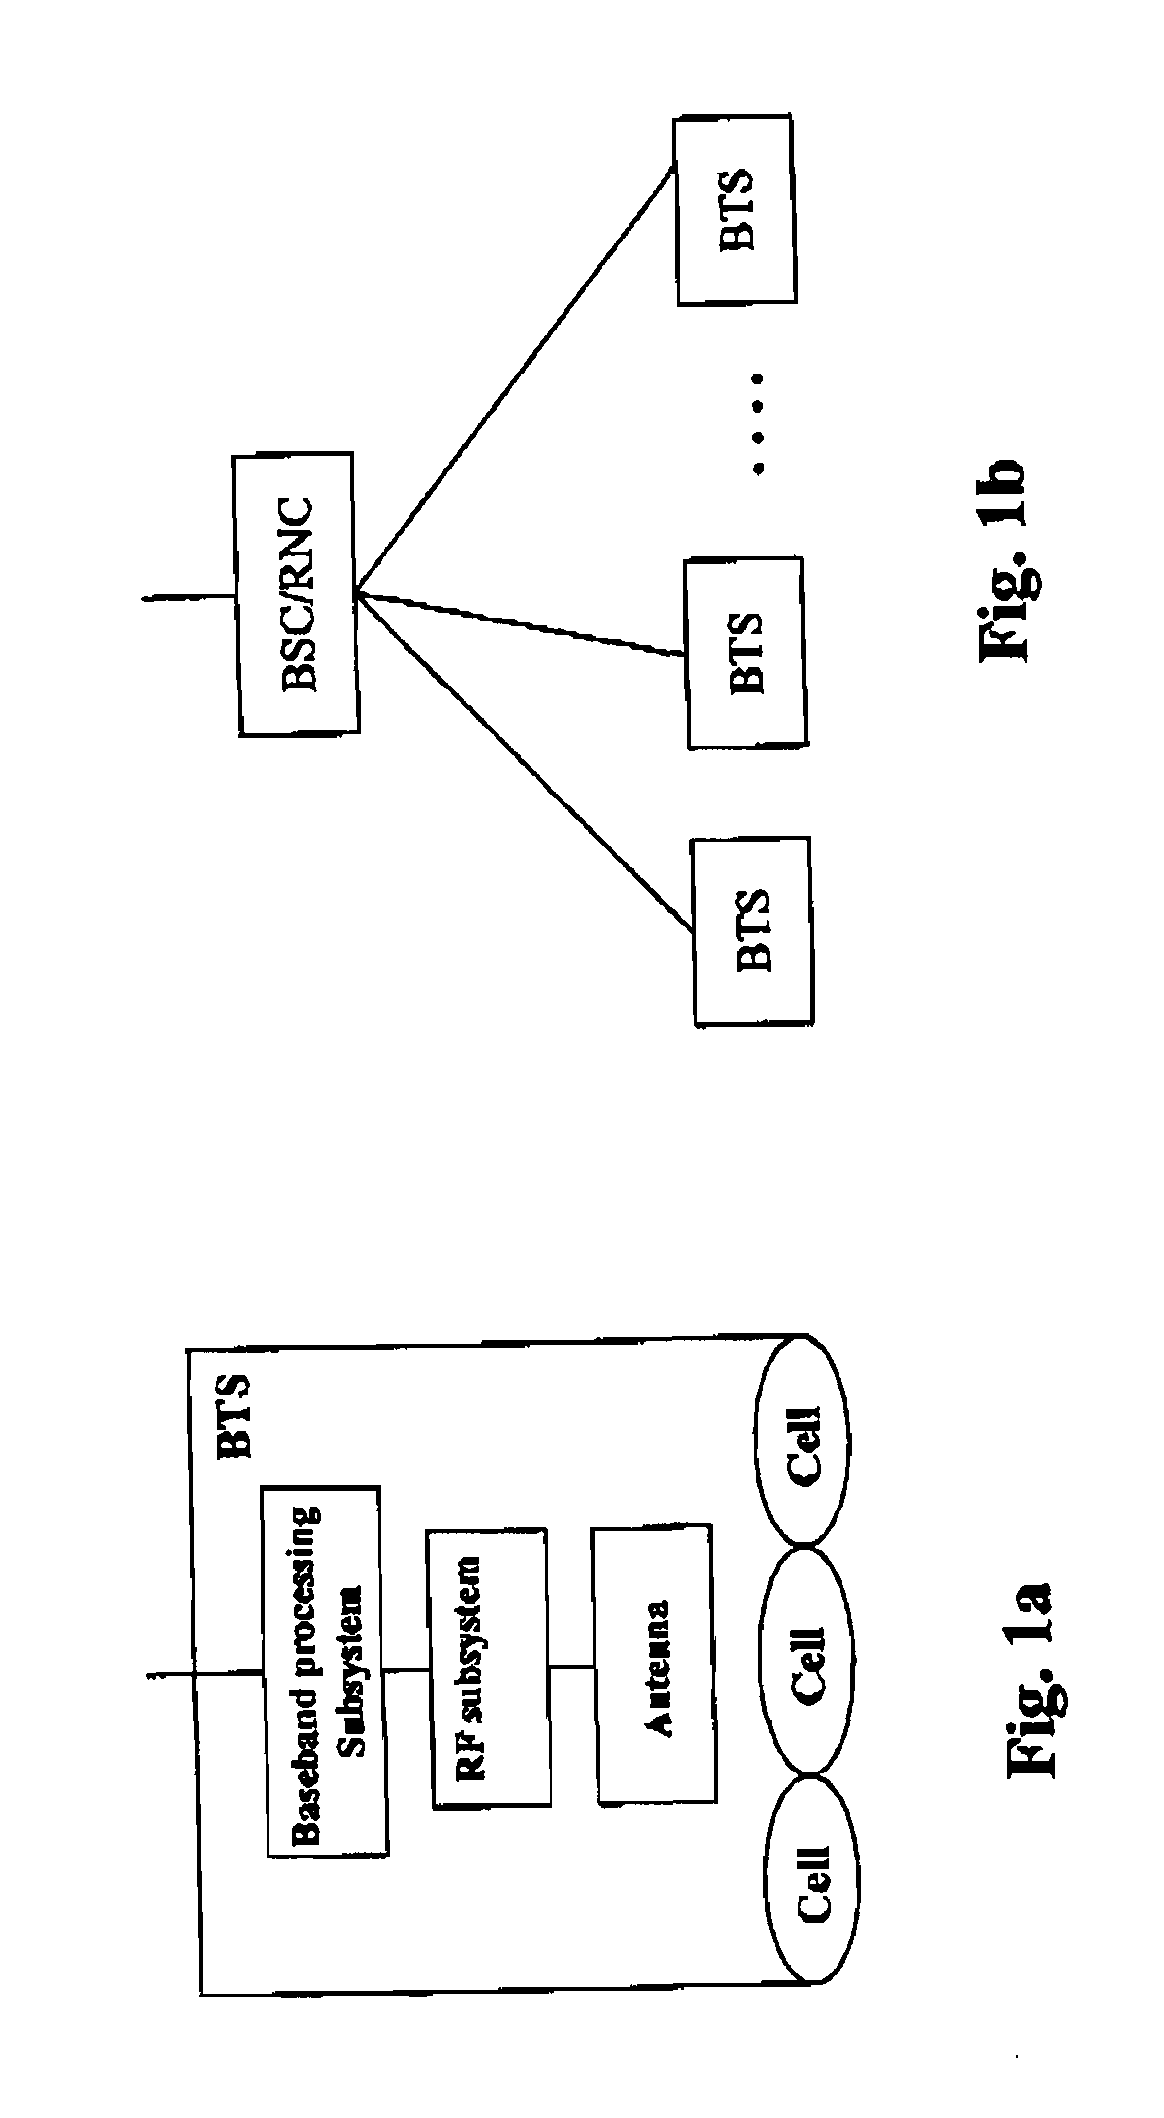 Distributed Wireless System with Centralized Control of Resources